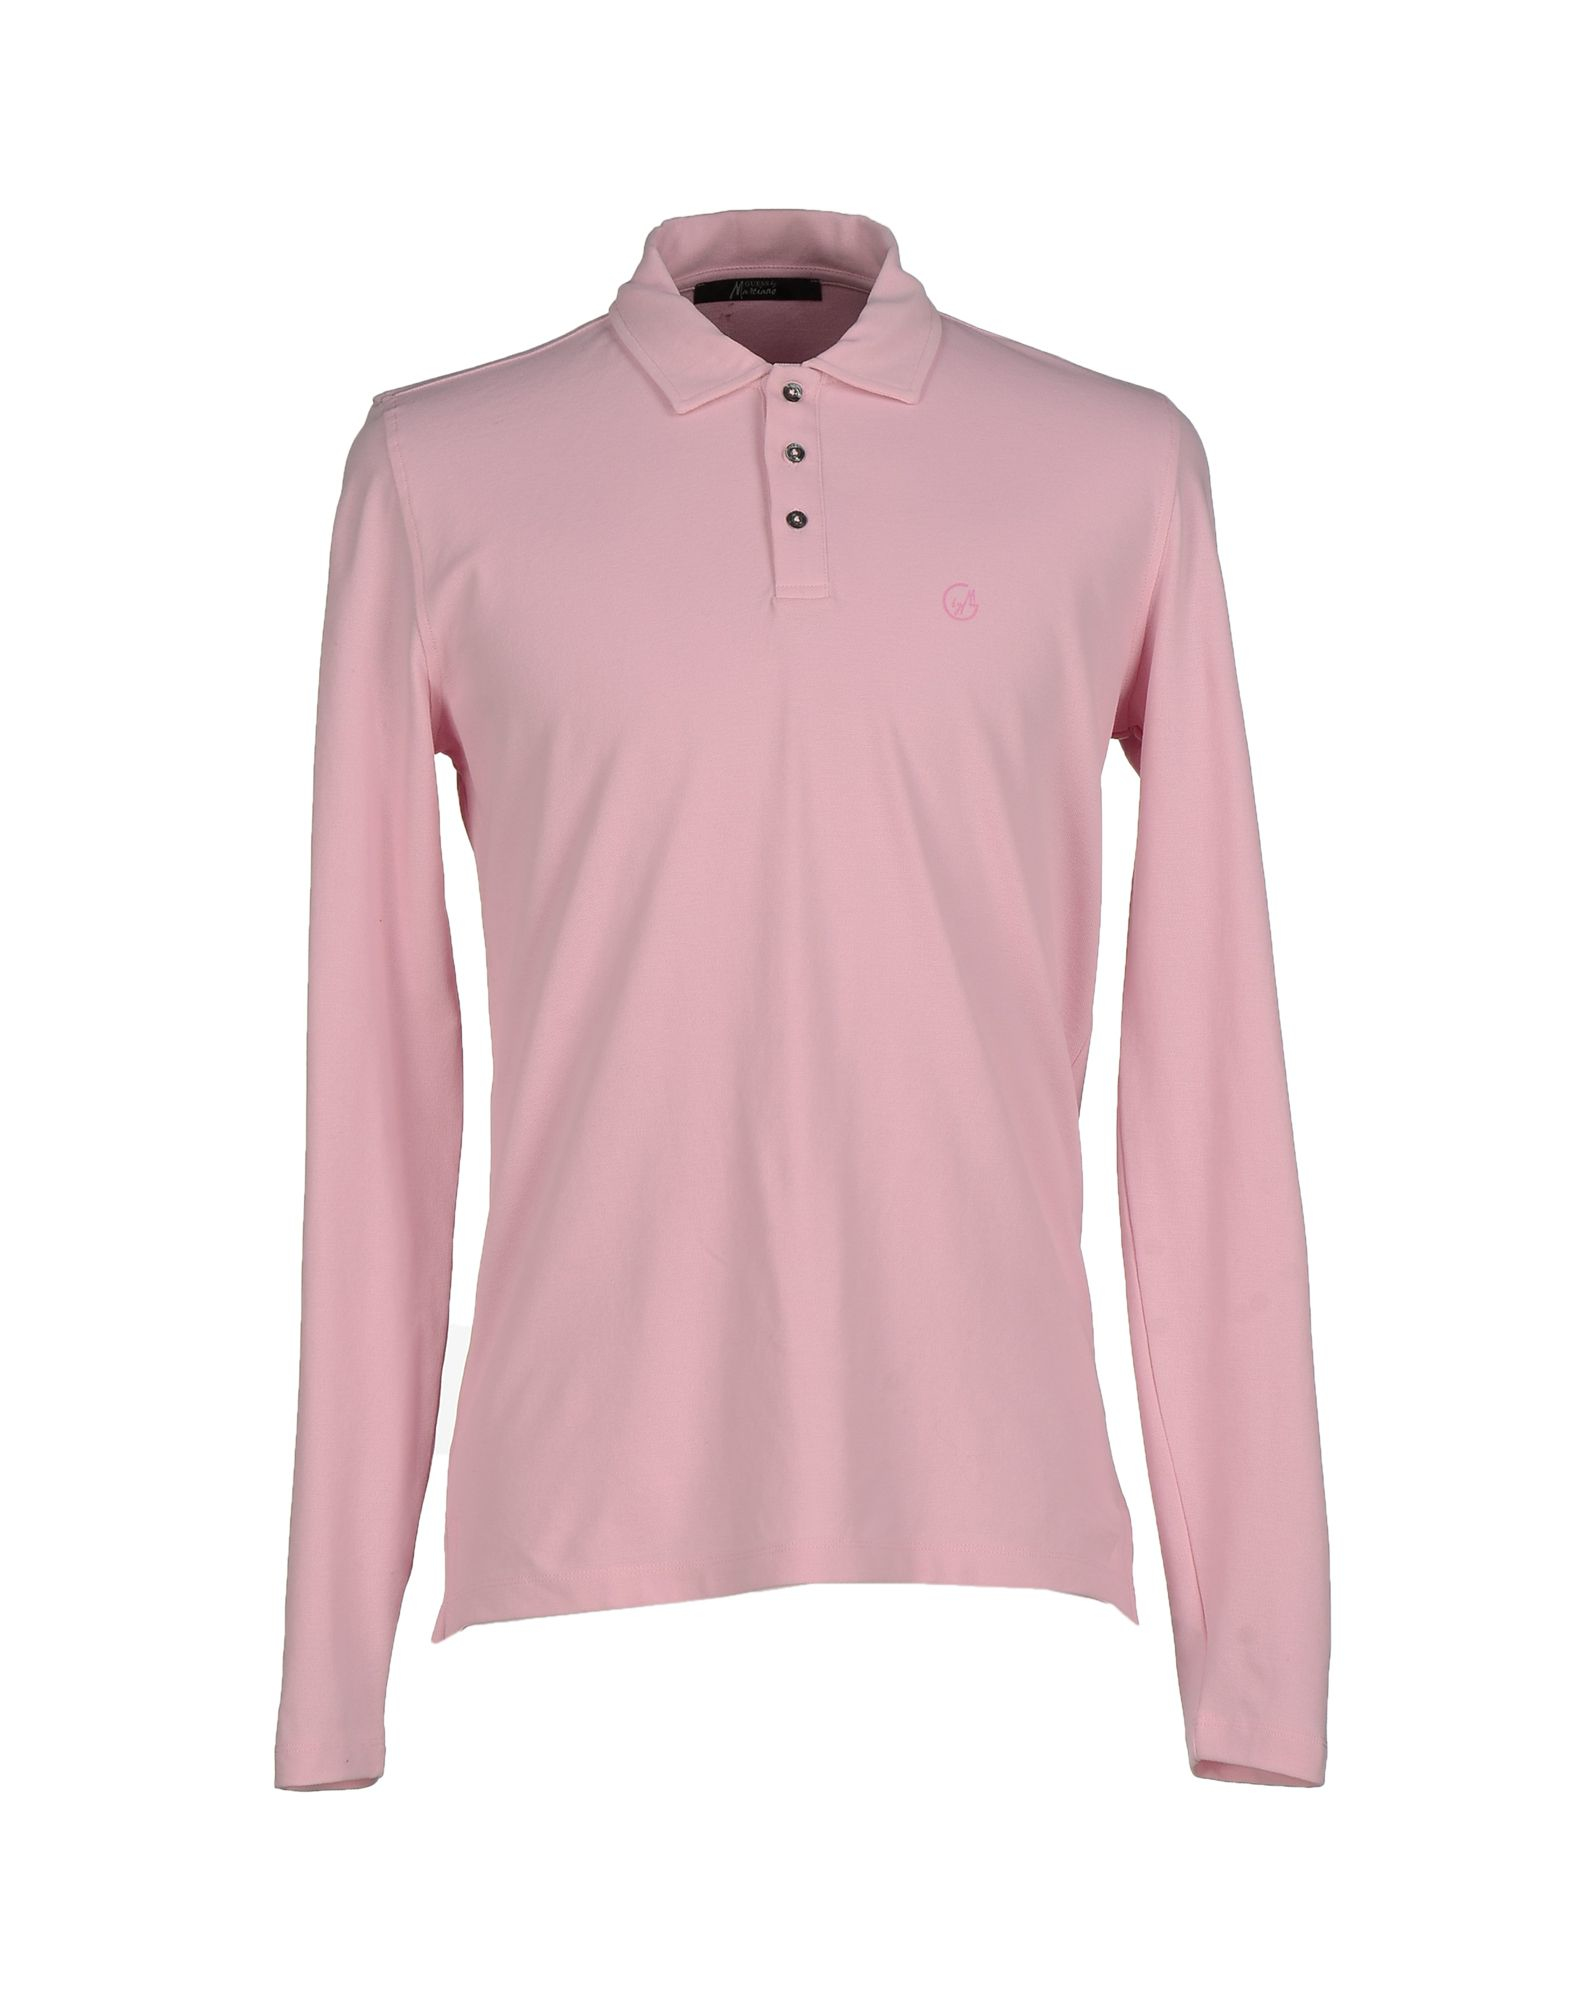 Lyst - Guess Polo Shirt in Pink for Men